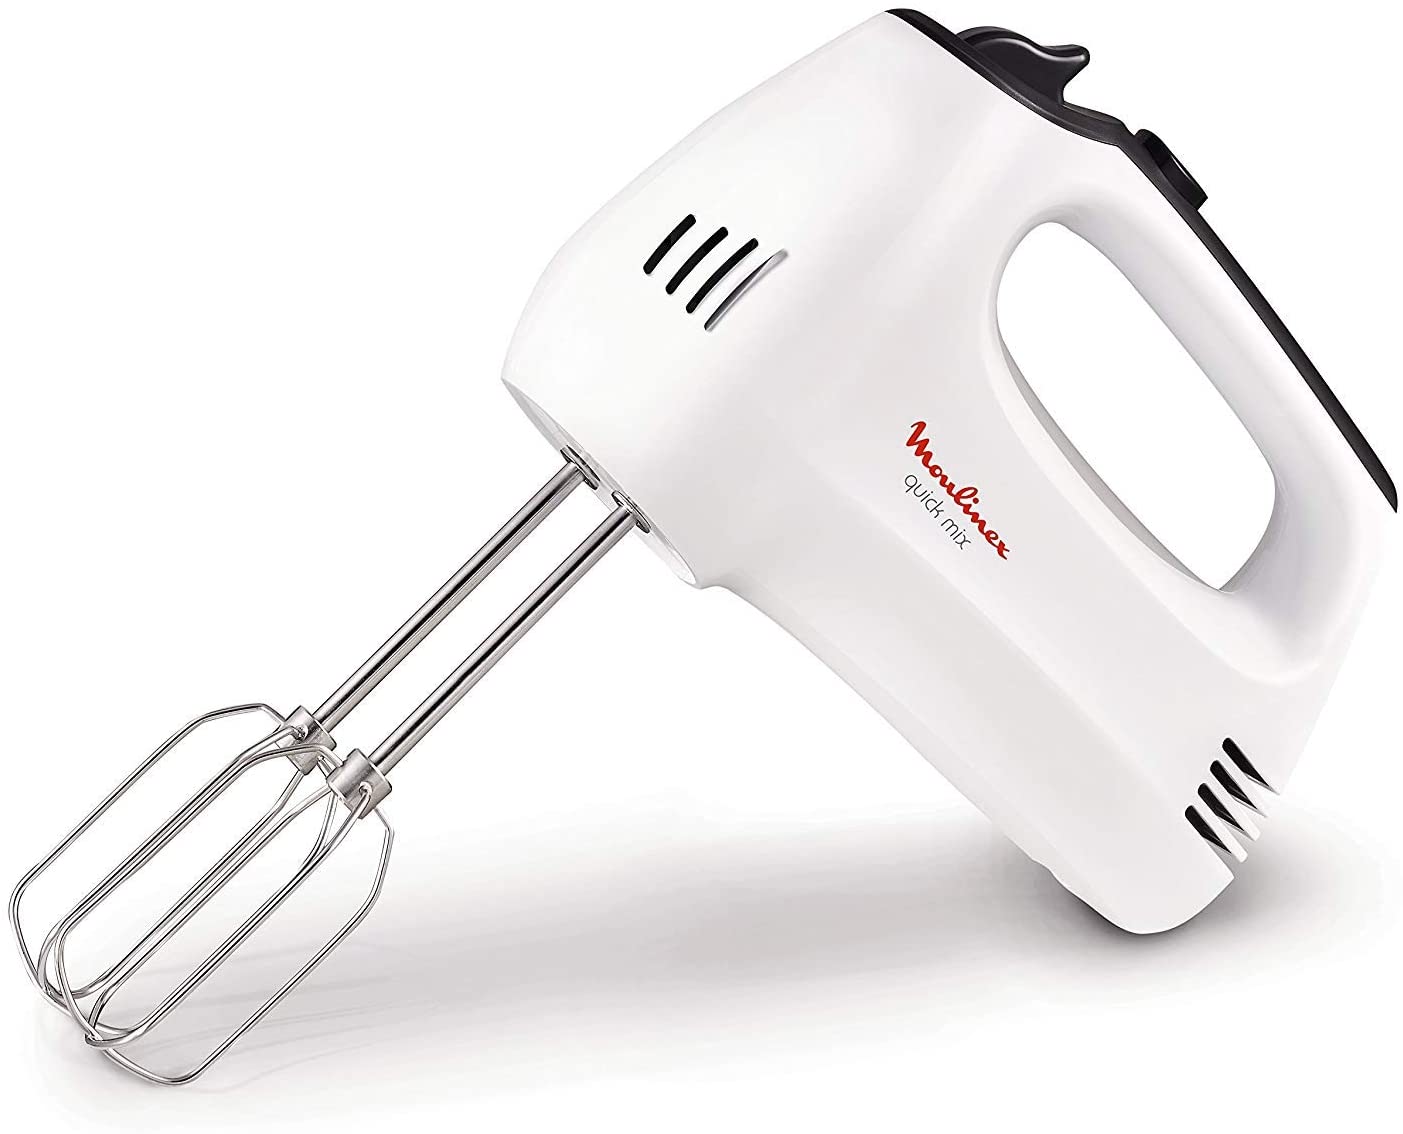 Moulinex hm3101 SBATTITORE Quick Mix Electric with Whisk and Hook Impastatori